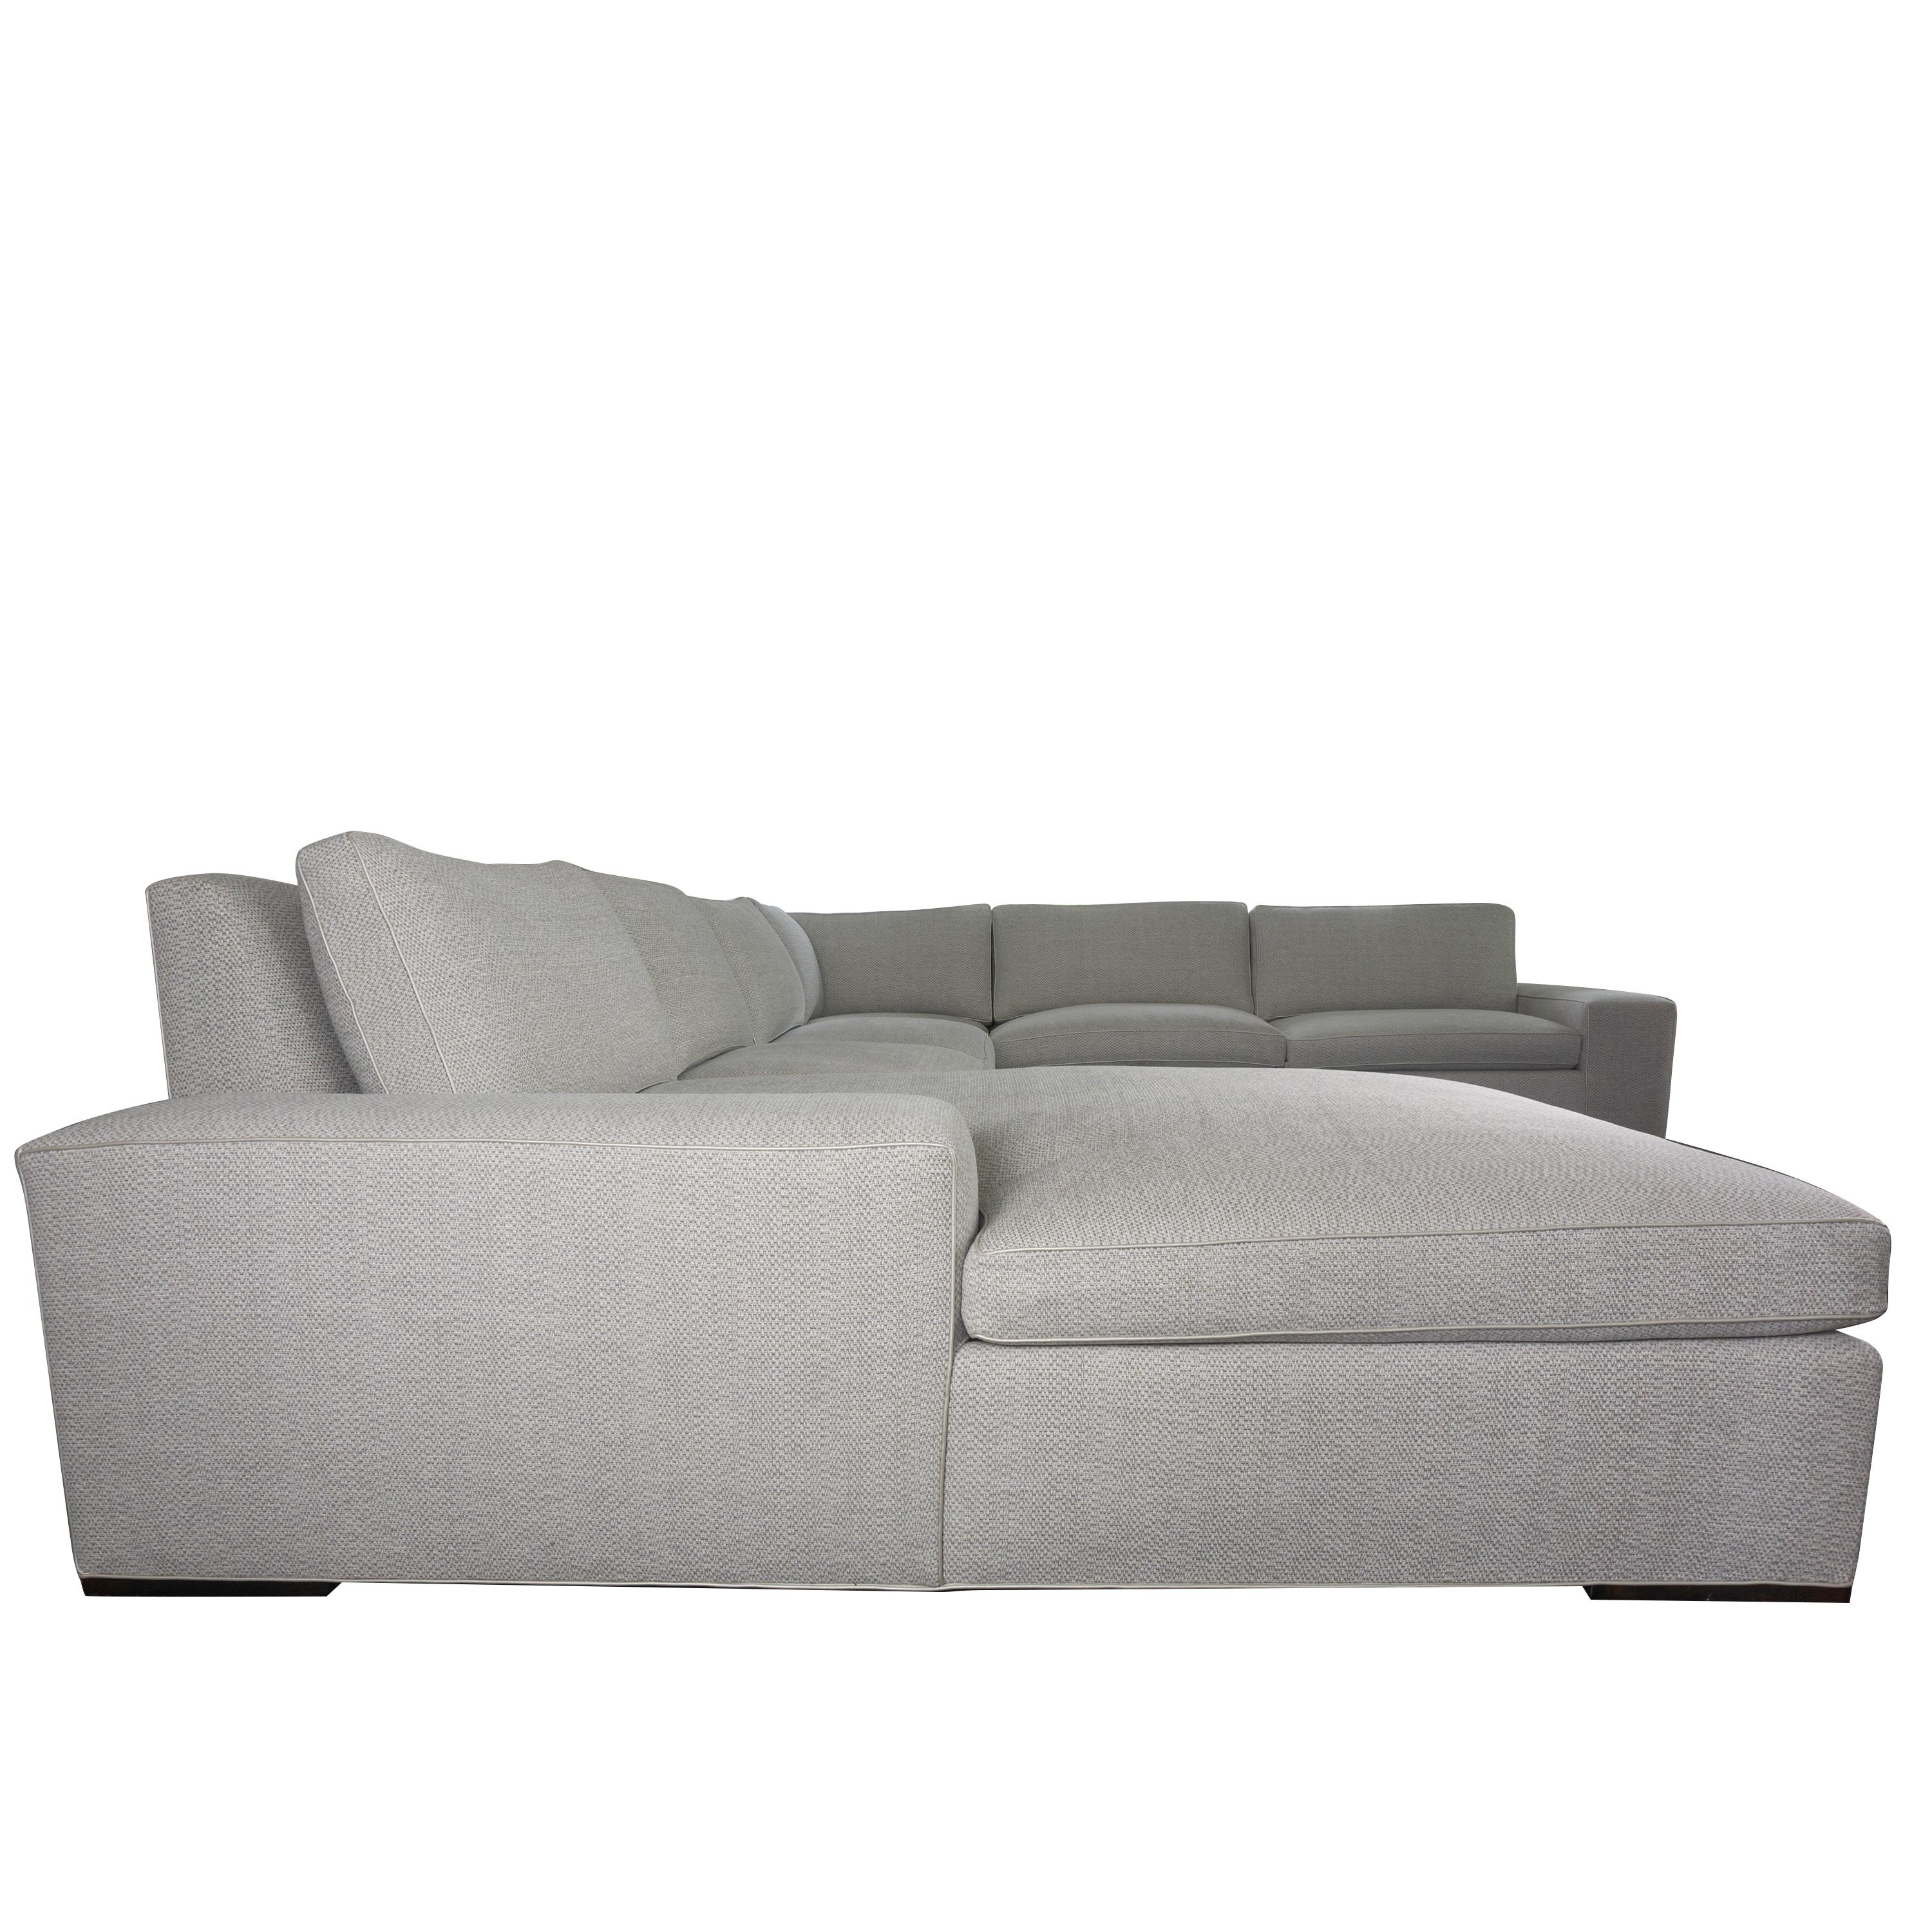 Contemporary Modern Square Arm Sectional Sofa with Chaise For Sale